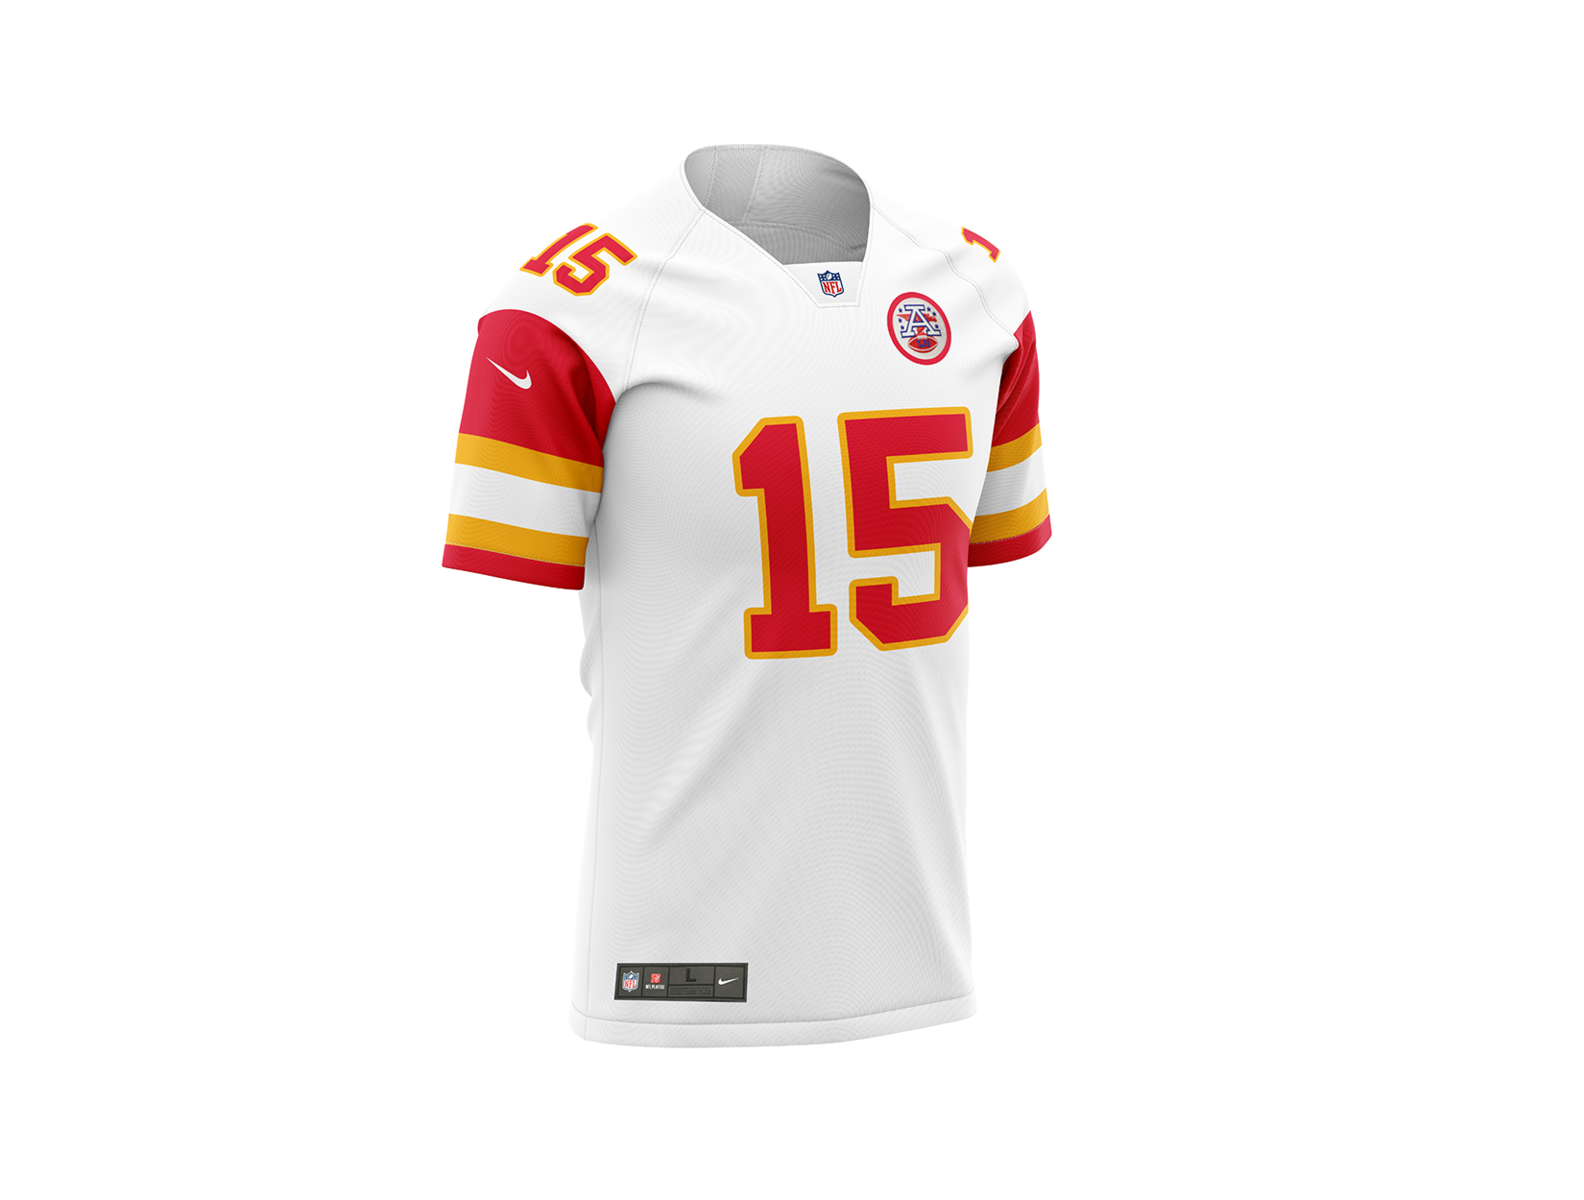 Kansas City Chiefs Concept Jersey 2020 by Luc S. on Dribbble